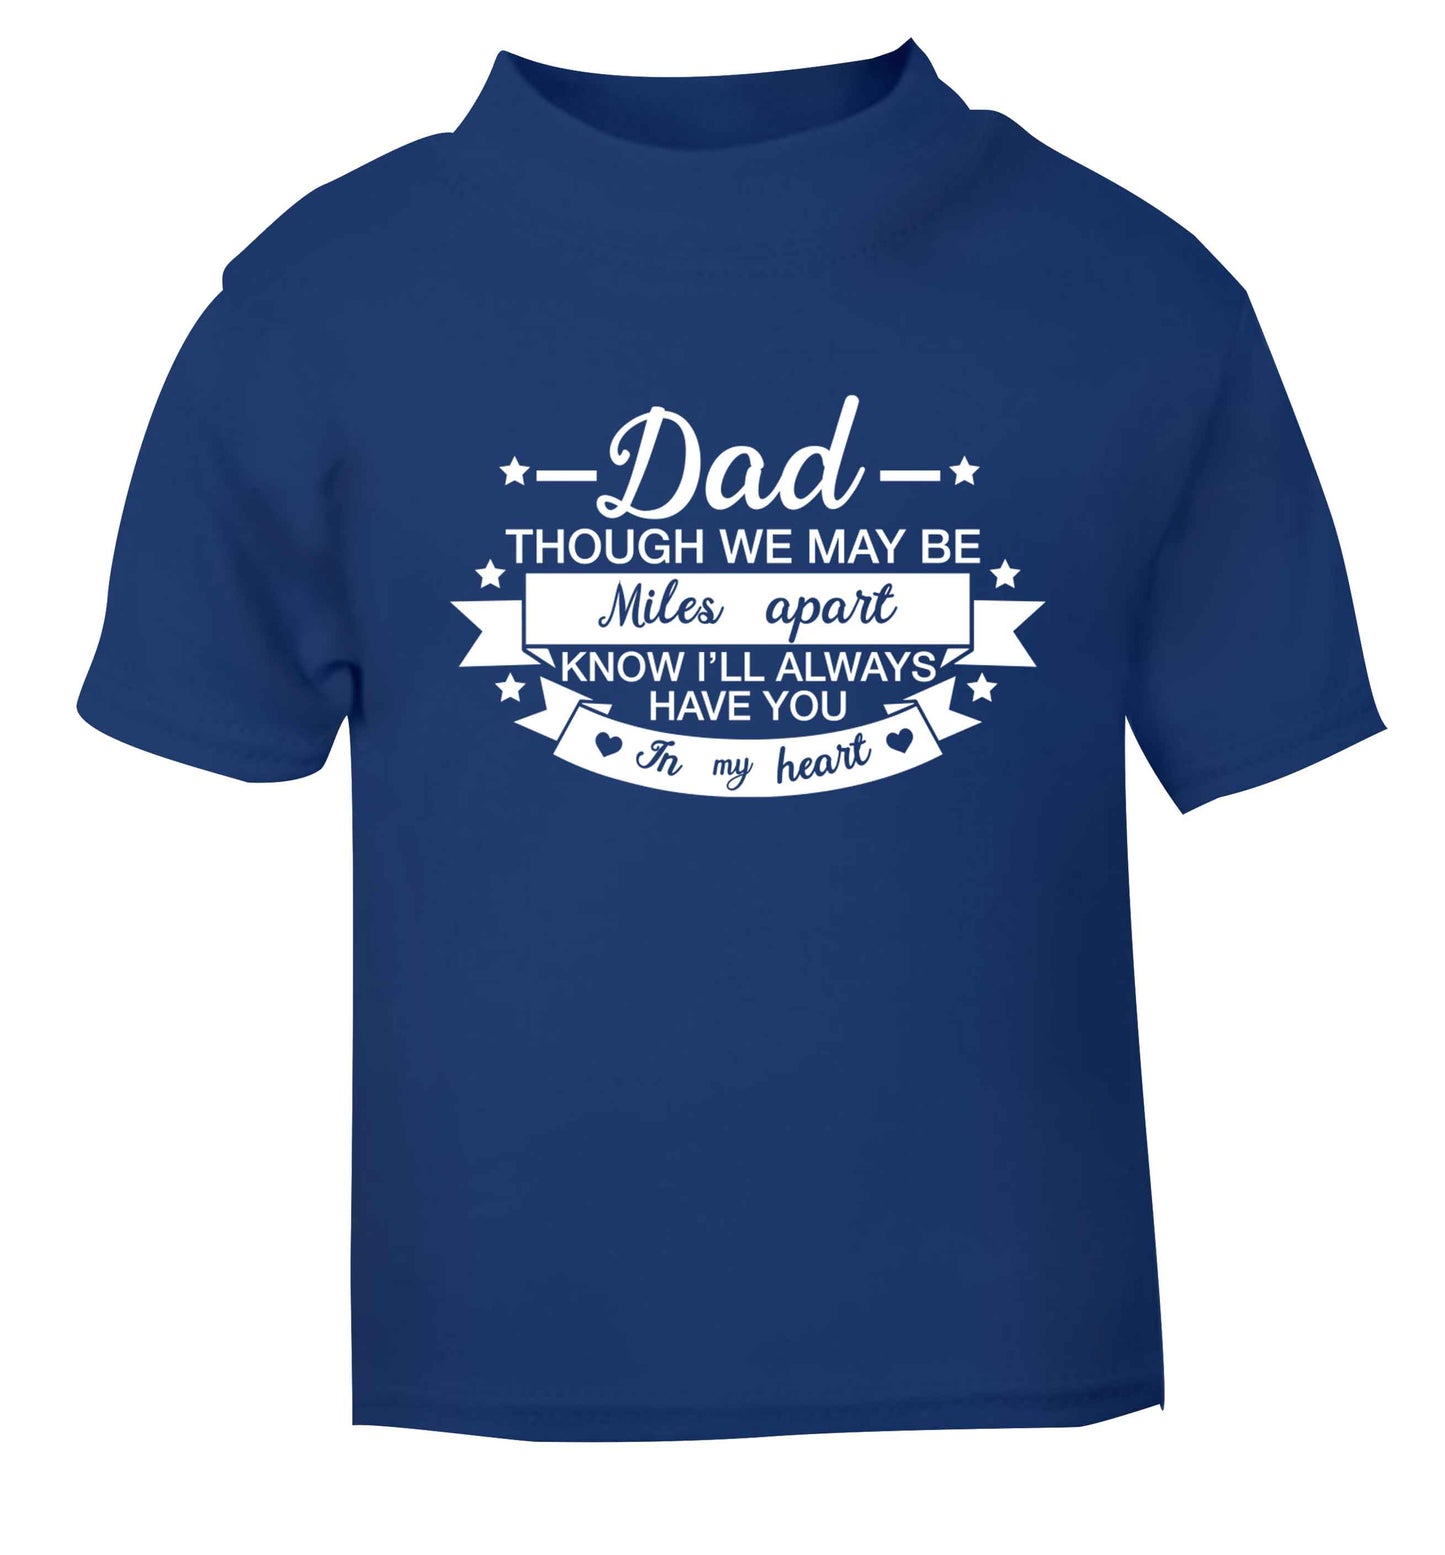 Dad though we are miles apart know I'll always have you in my heart blue baby toddler Tshirt 2 Years